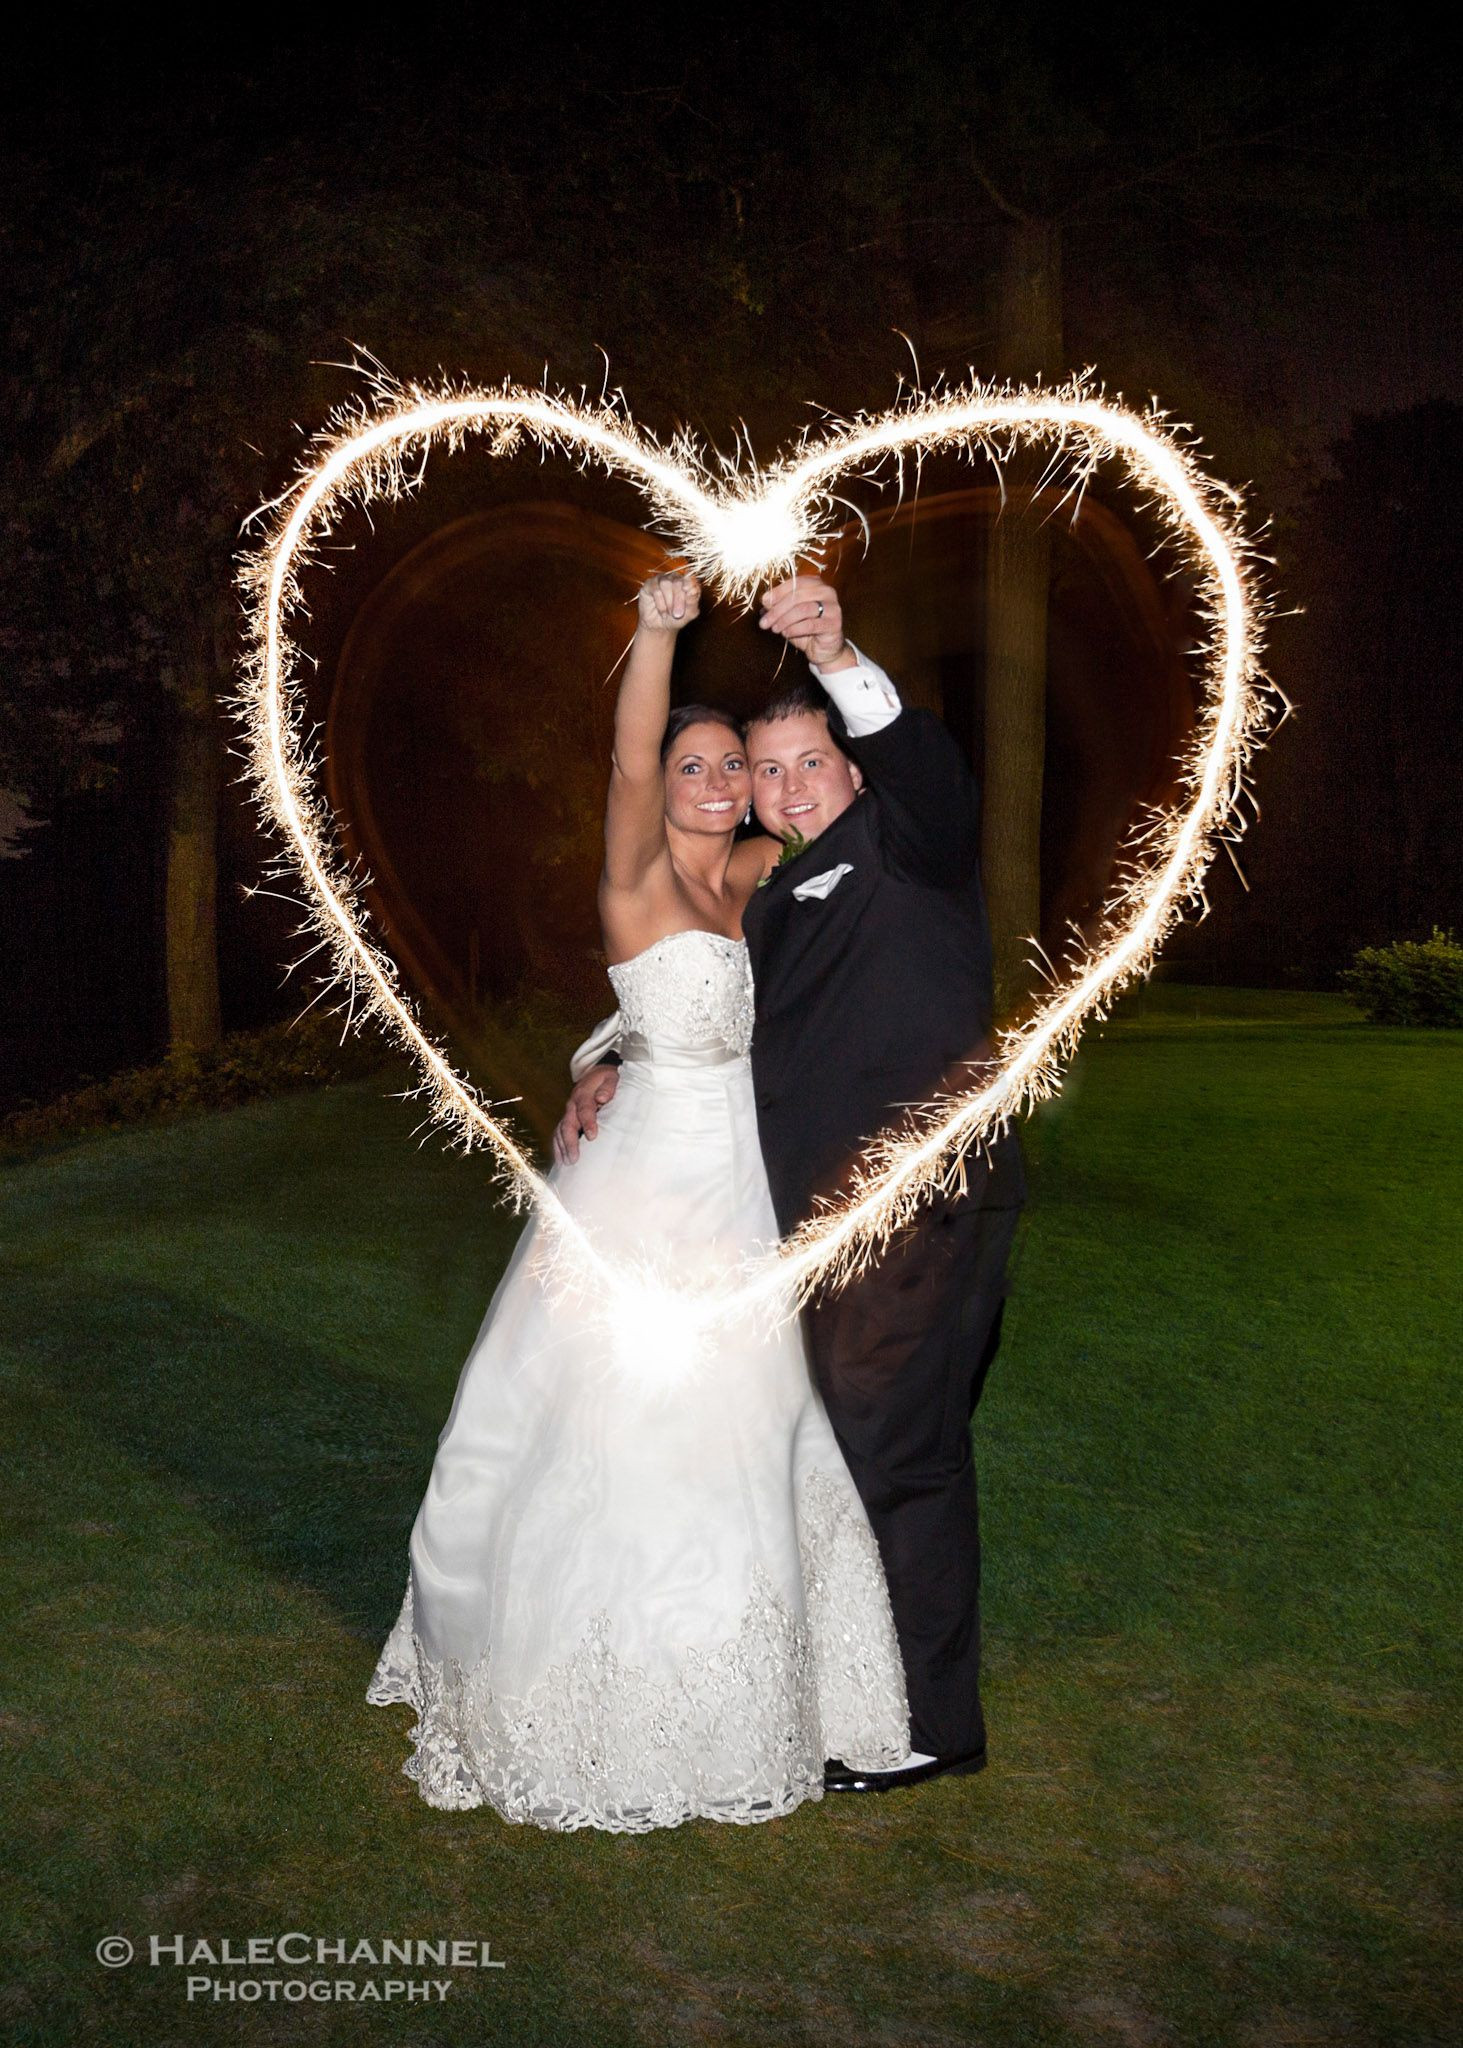 Photographing Sparklers At A Wedding
 This sparkler writing article shows you how 12 stunningly